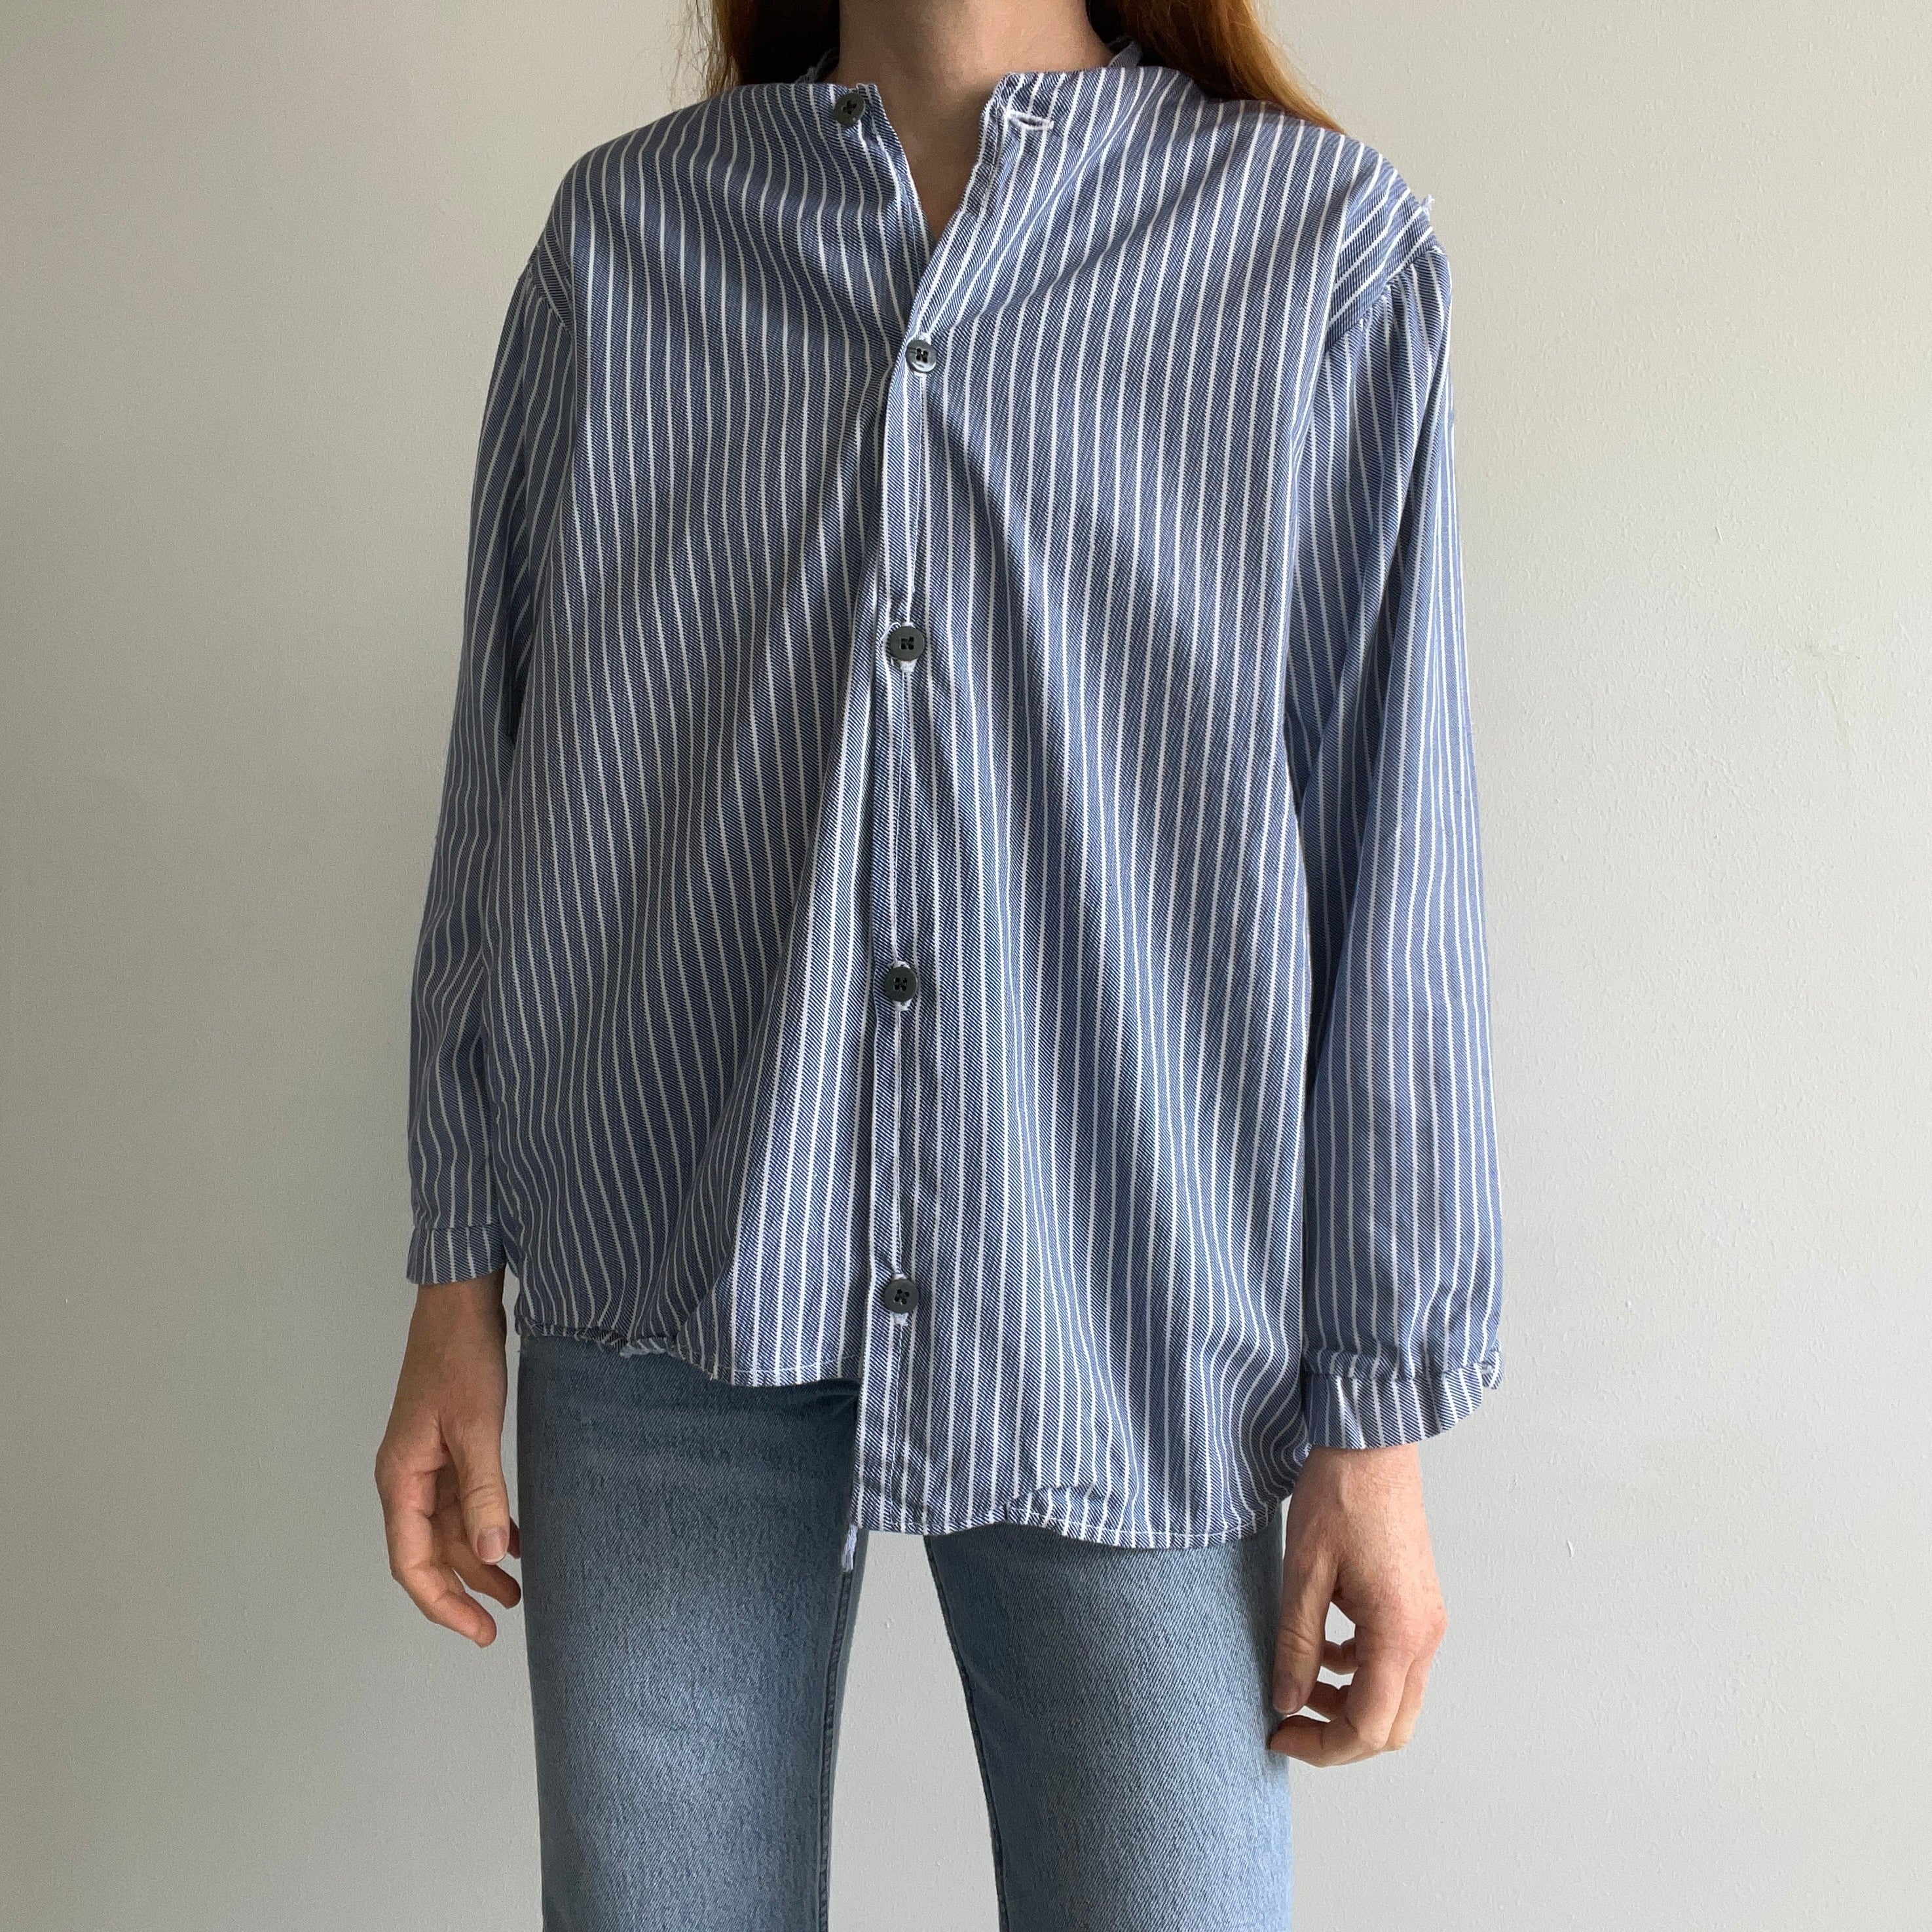 1970s French Workwear Cotton Striped Shirt with Misaligned Buttons